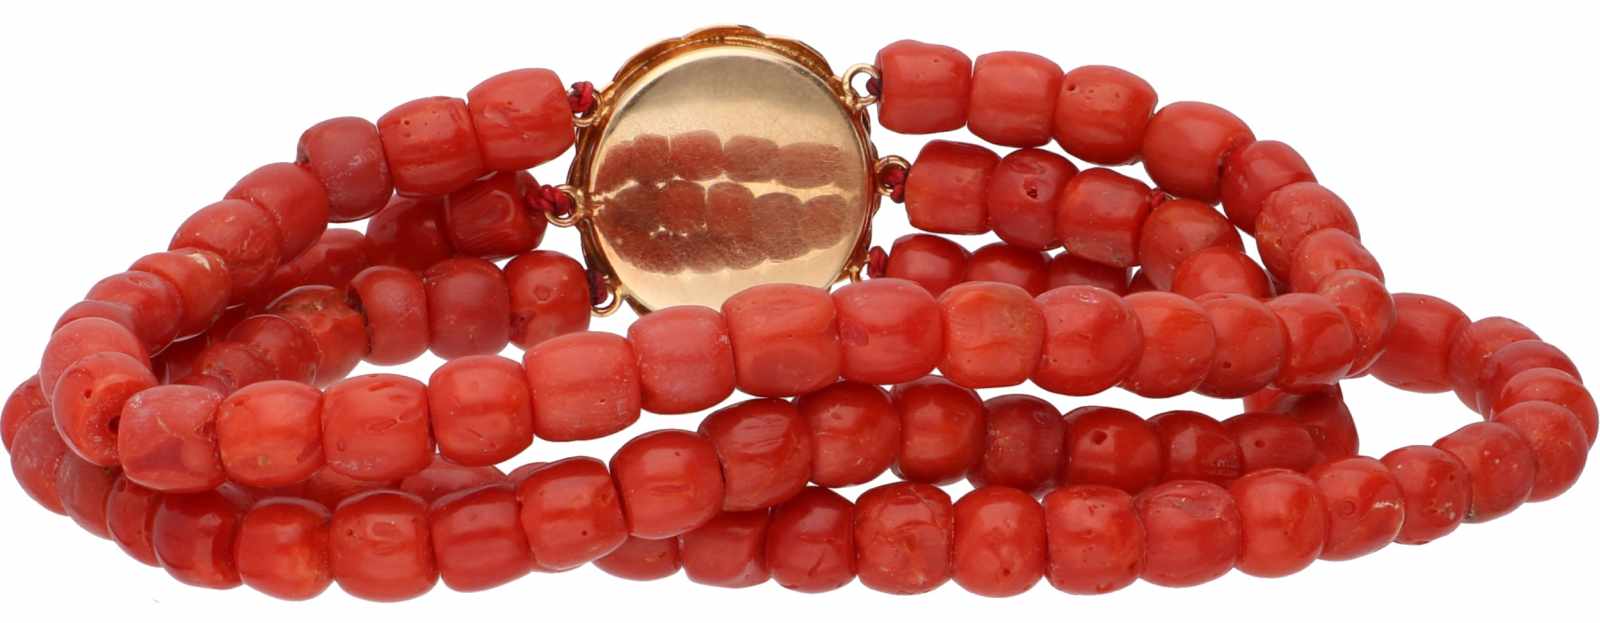 Bracelet with a yellow gold closure, red coral - 14 ct. - Image 2 of 2